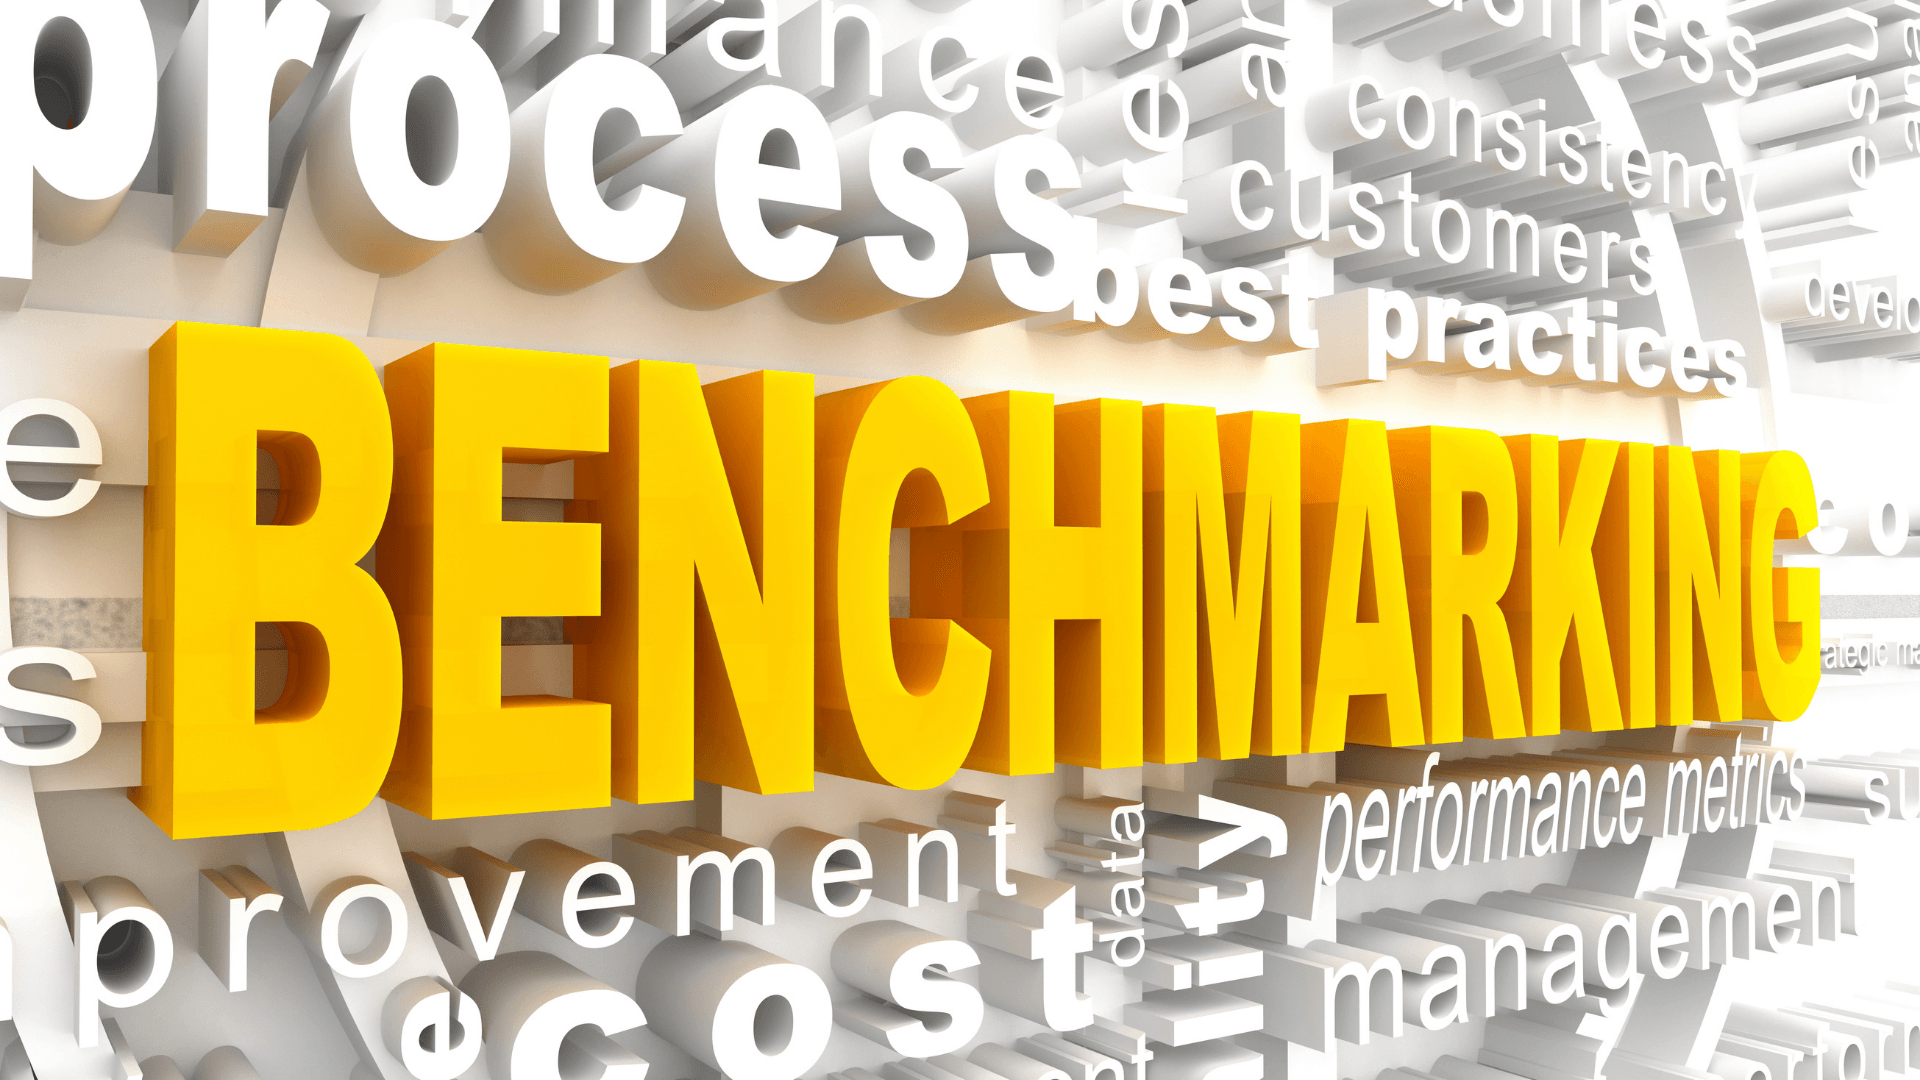 Benchmarking yourself against your competitors